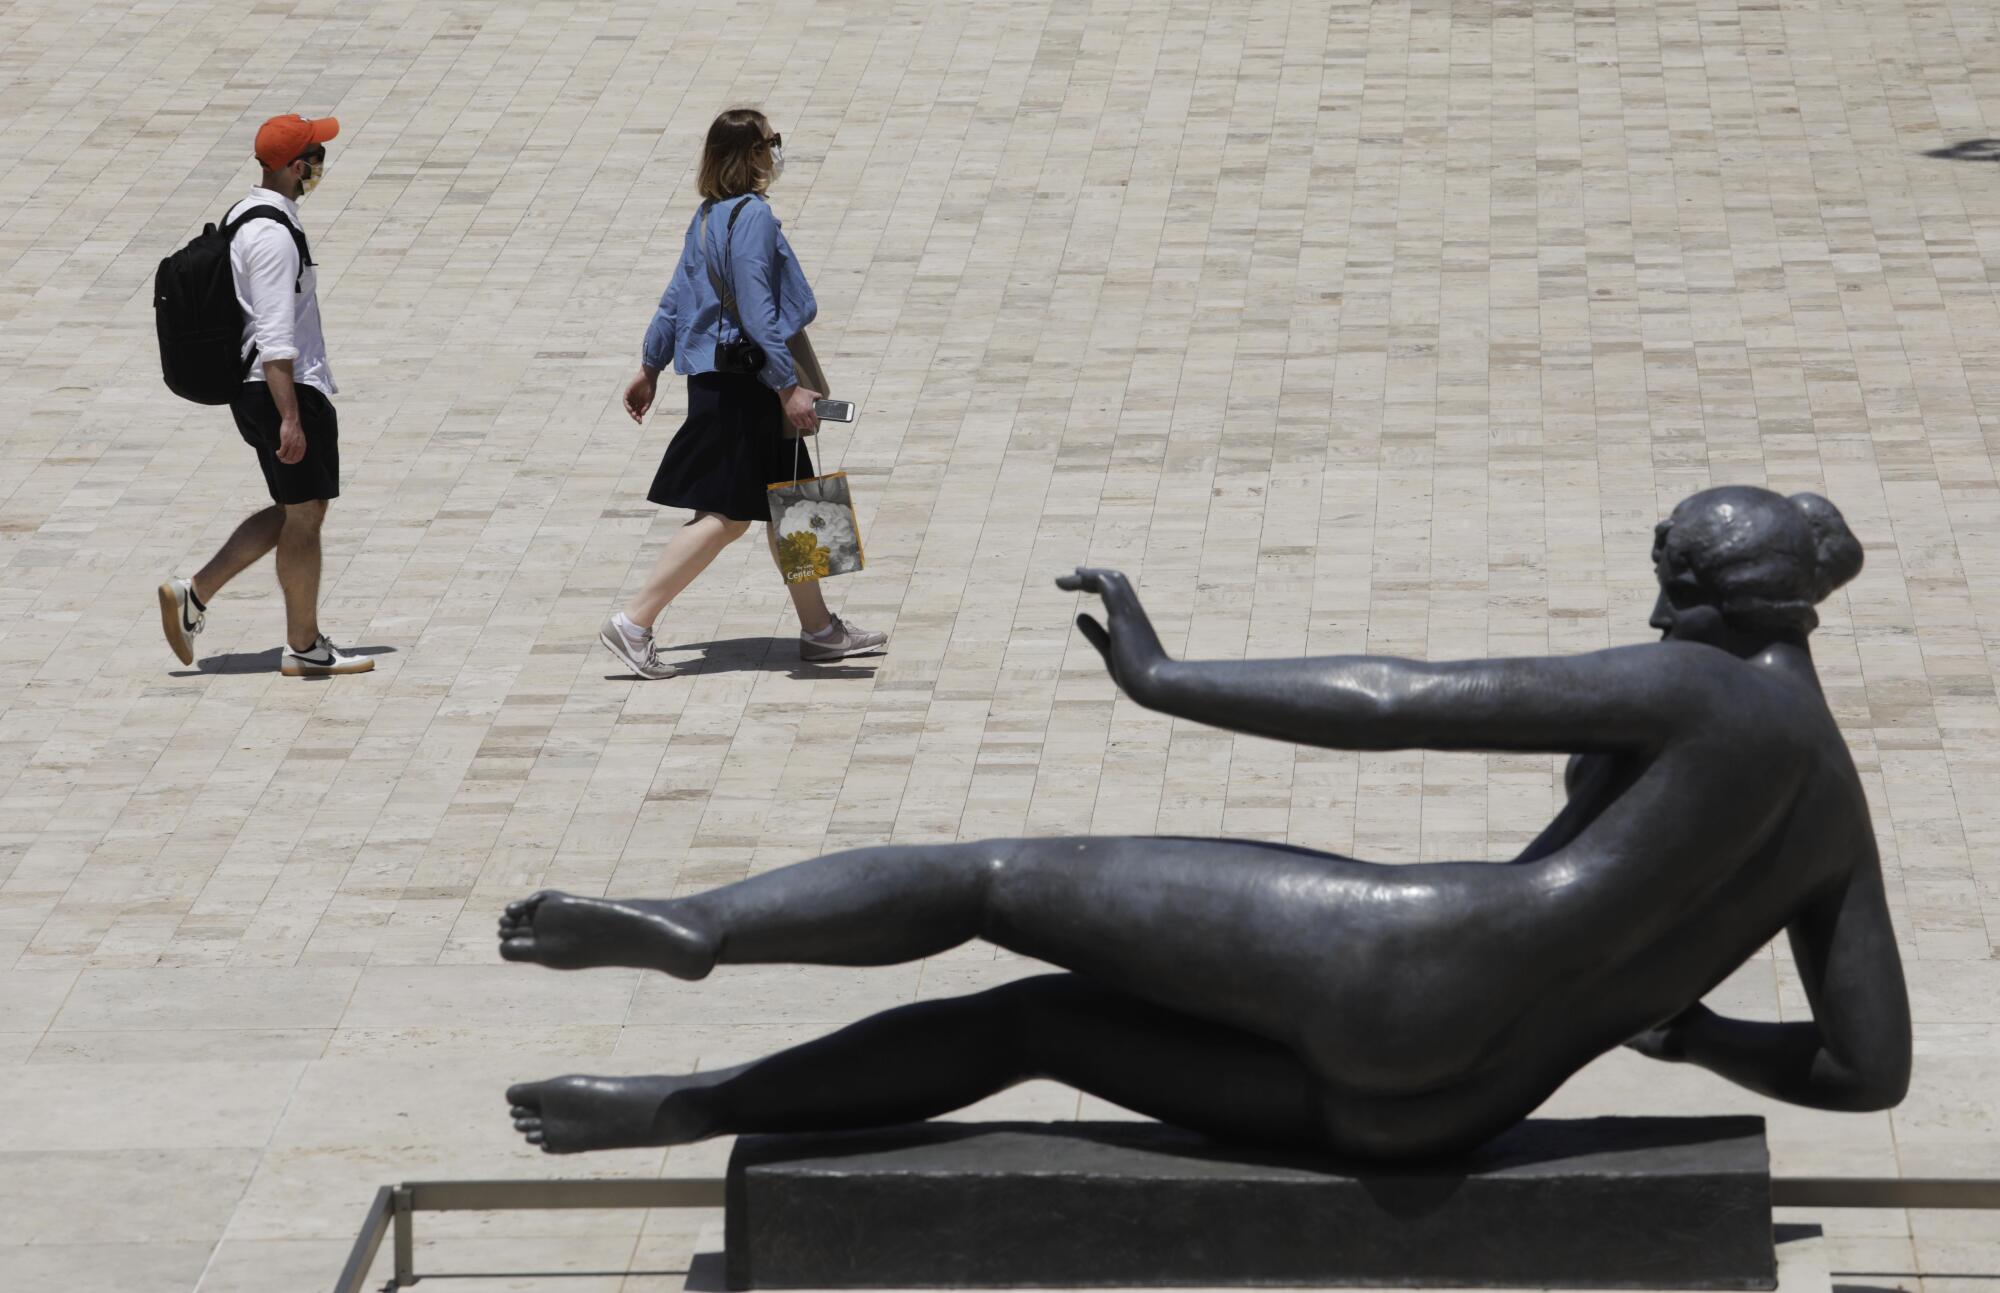 Two visitors walk past the sculpture "Air" by Aristide Maillol.